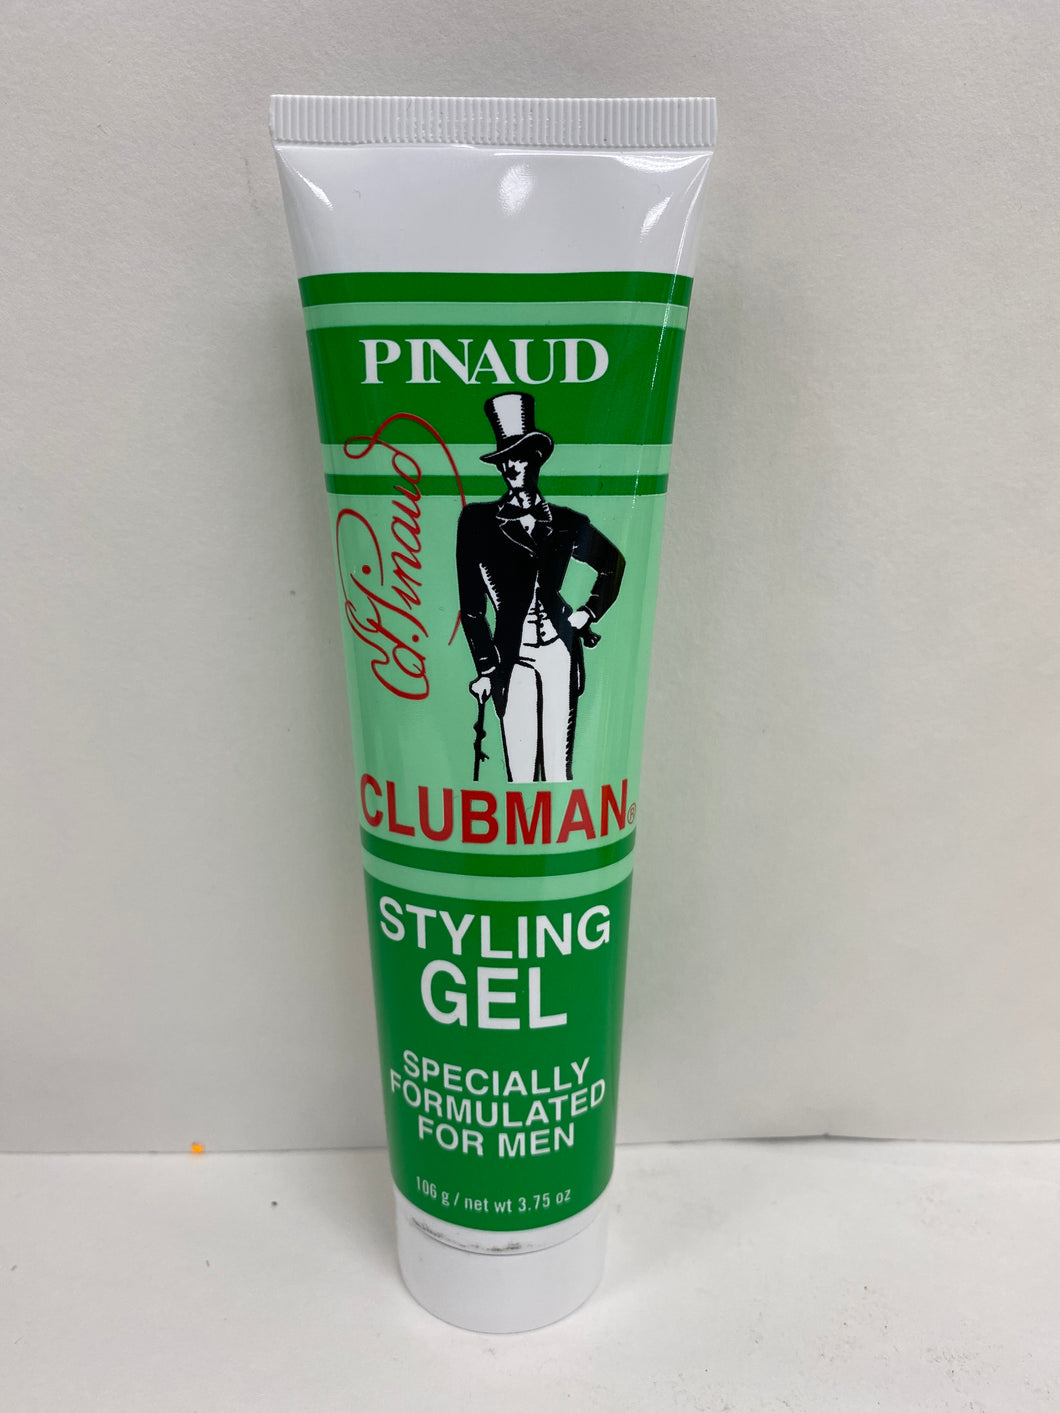 Pinaud Clubman Styling Gel Specially Formulated For Men